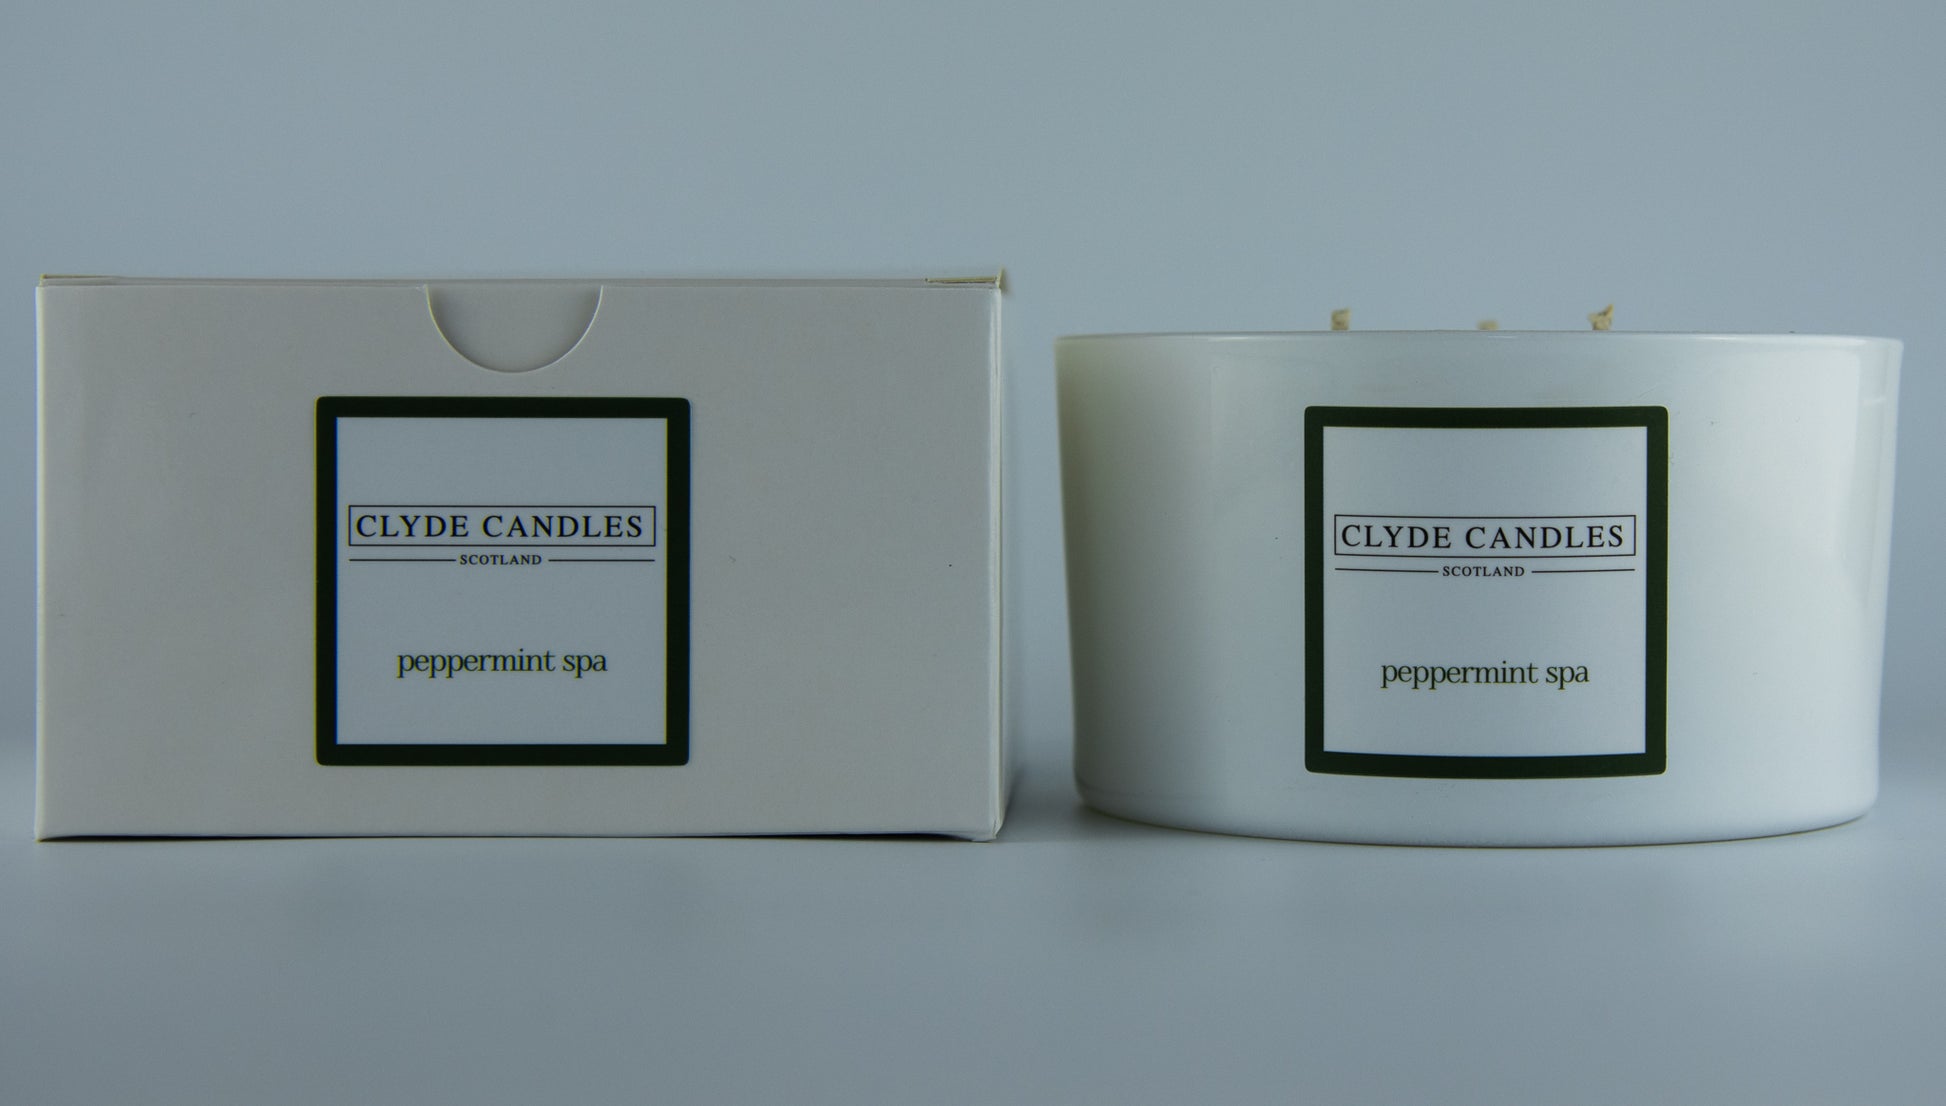 Peppermint Spa Scented Candle Gift Box Three Wicks, Natural Soy wax, Scottish Candles, Clyde Candles, eucalyptus soy candle, Fresh candle, bathroom candle